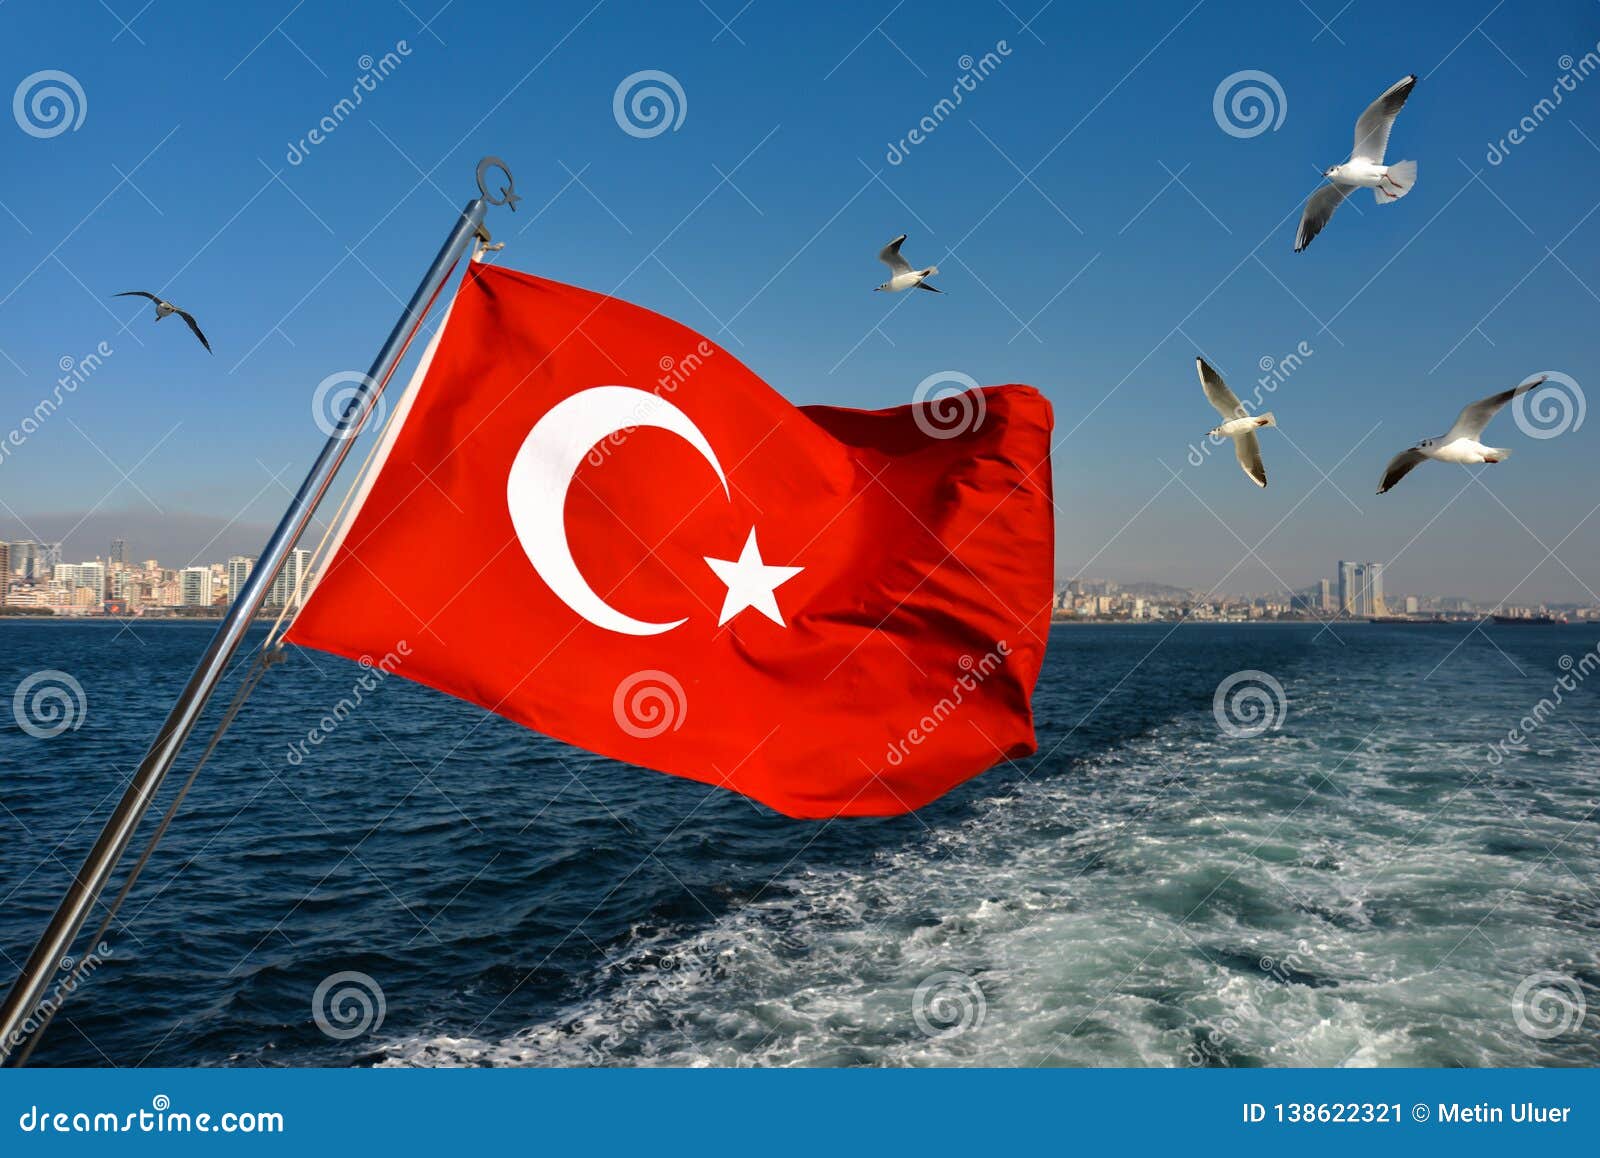 Bask in the allure of Turkey's flag with our adult galleries